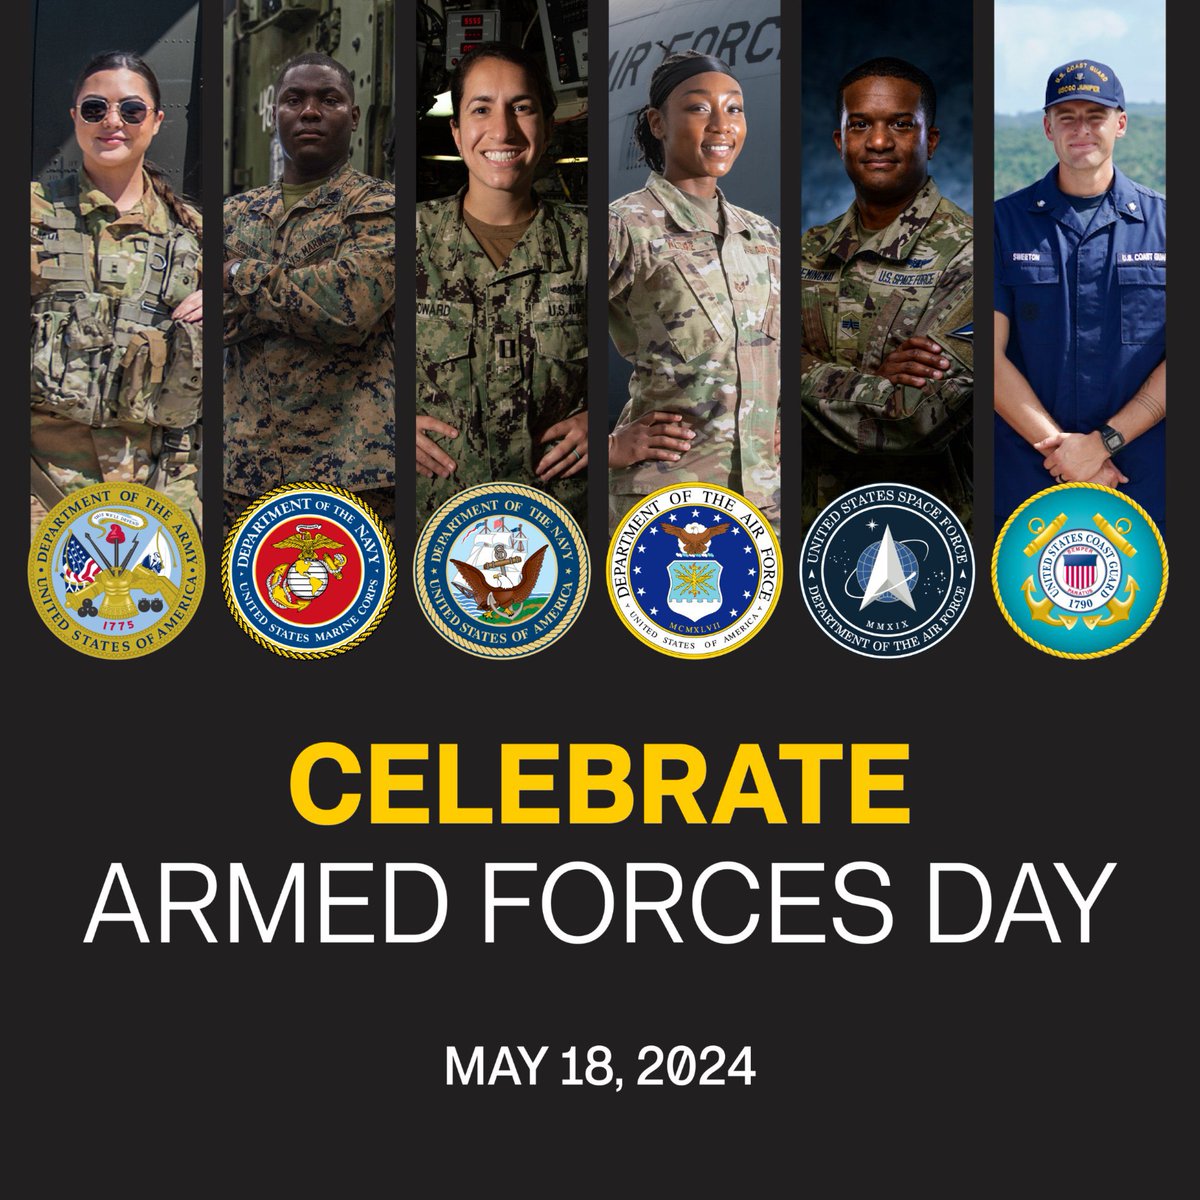 Today, we honor the brave women and men who serve in the six branches of the Armed Forces. Thank you for your service, dedication, and sacrifice. We are so grateful. #ArmedForcesDay